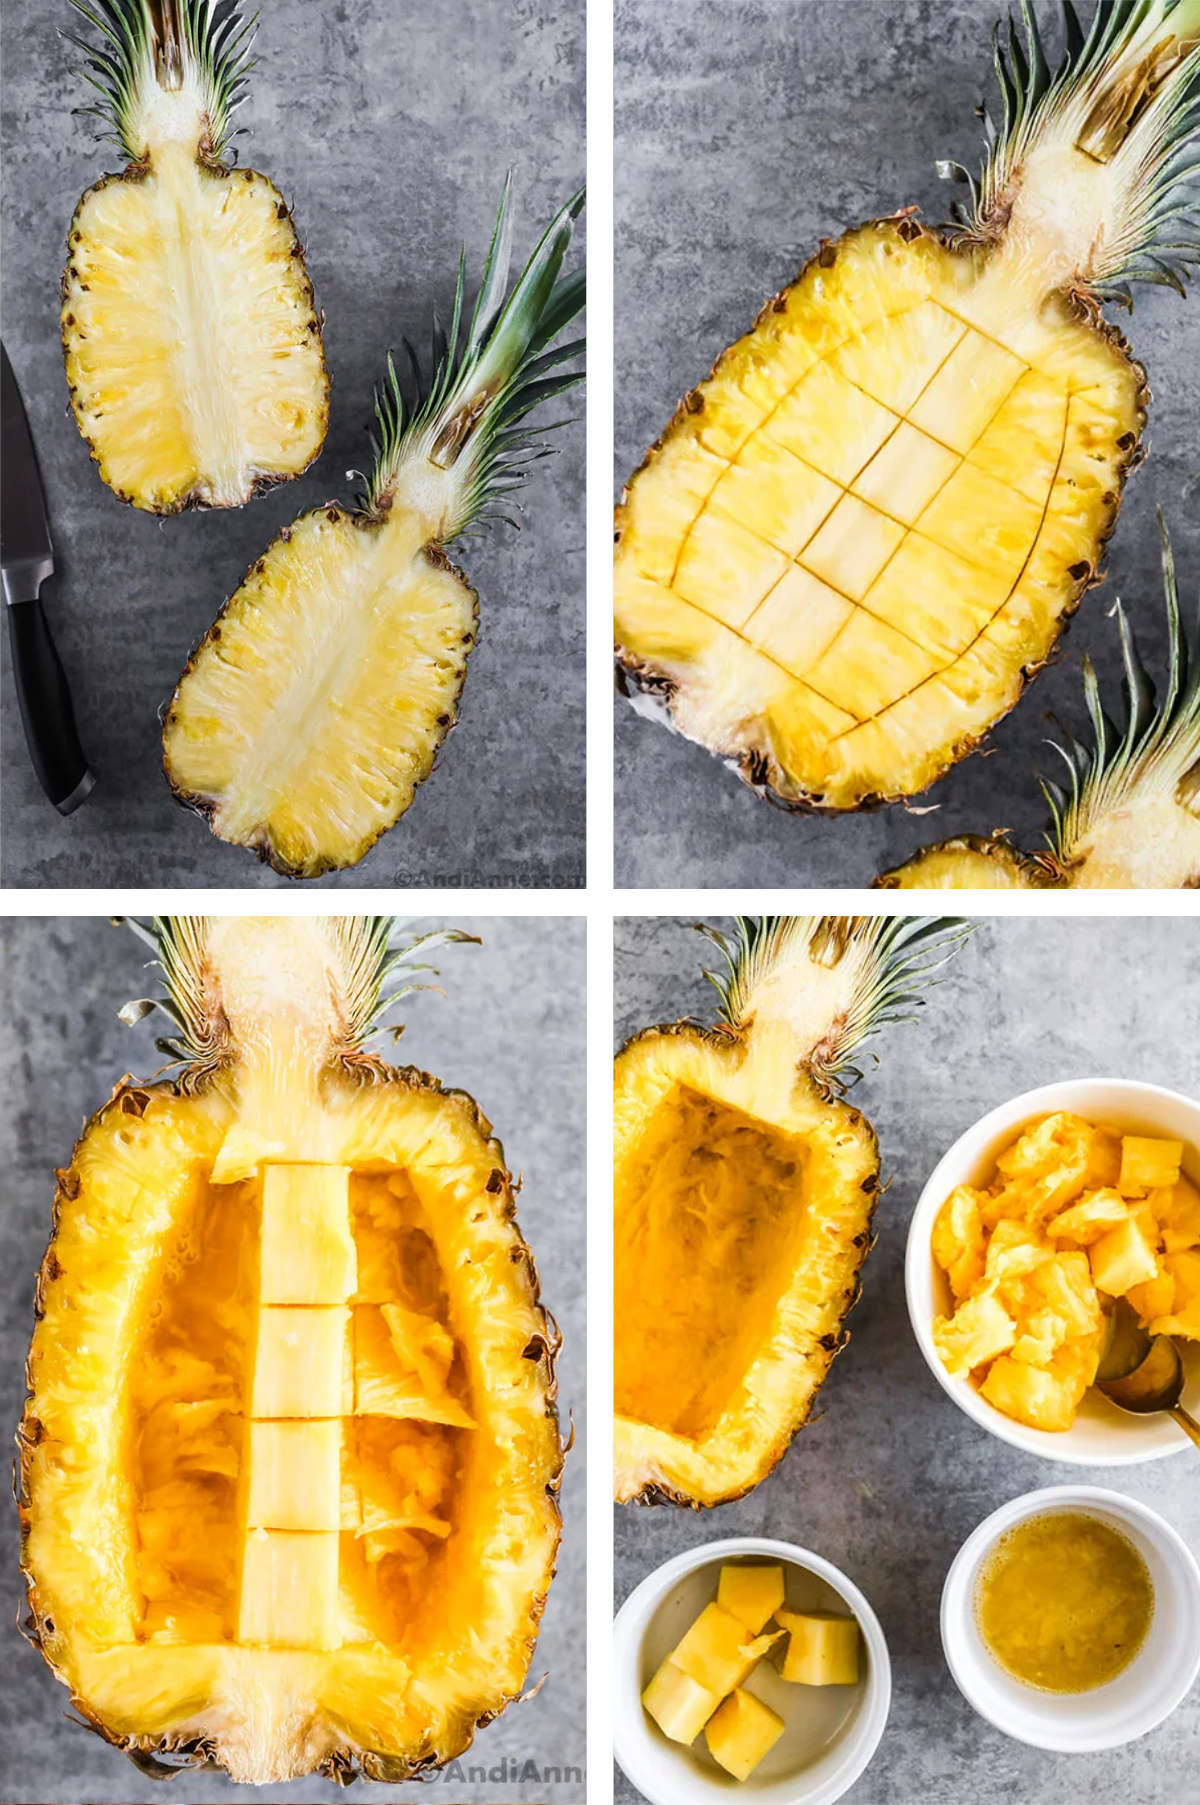 Four images. 1. Pineapple sliced in half vertically. 2. Pineapple with vertical and horizontal lines cut. 3. Pieces of pineapple removed where lines once were. 4. chunks of pineapple in ceramic bowls next to newly made pineapple boat. 